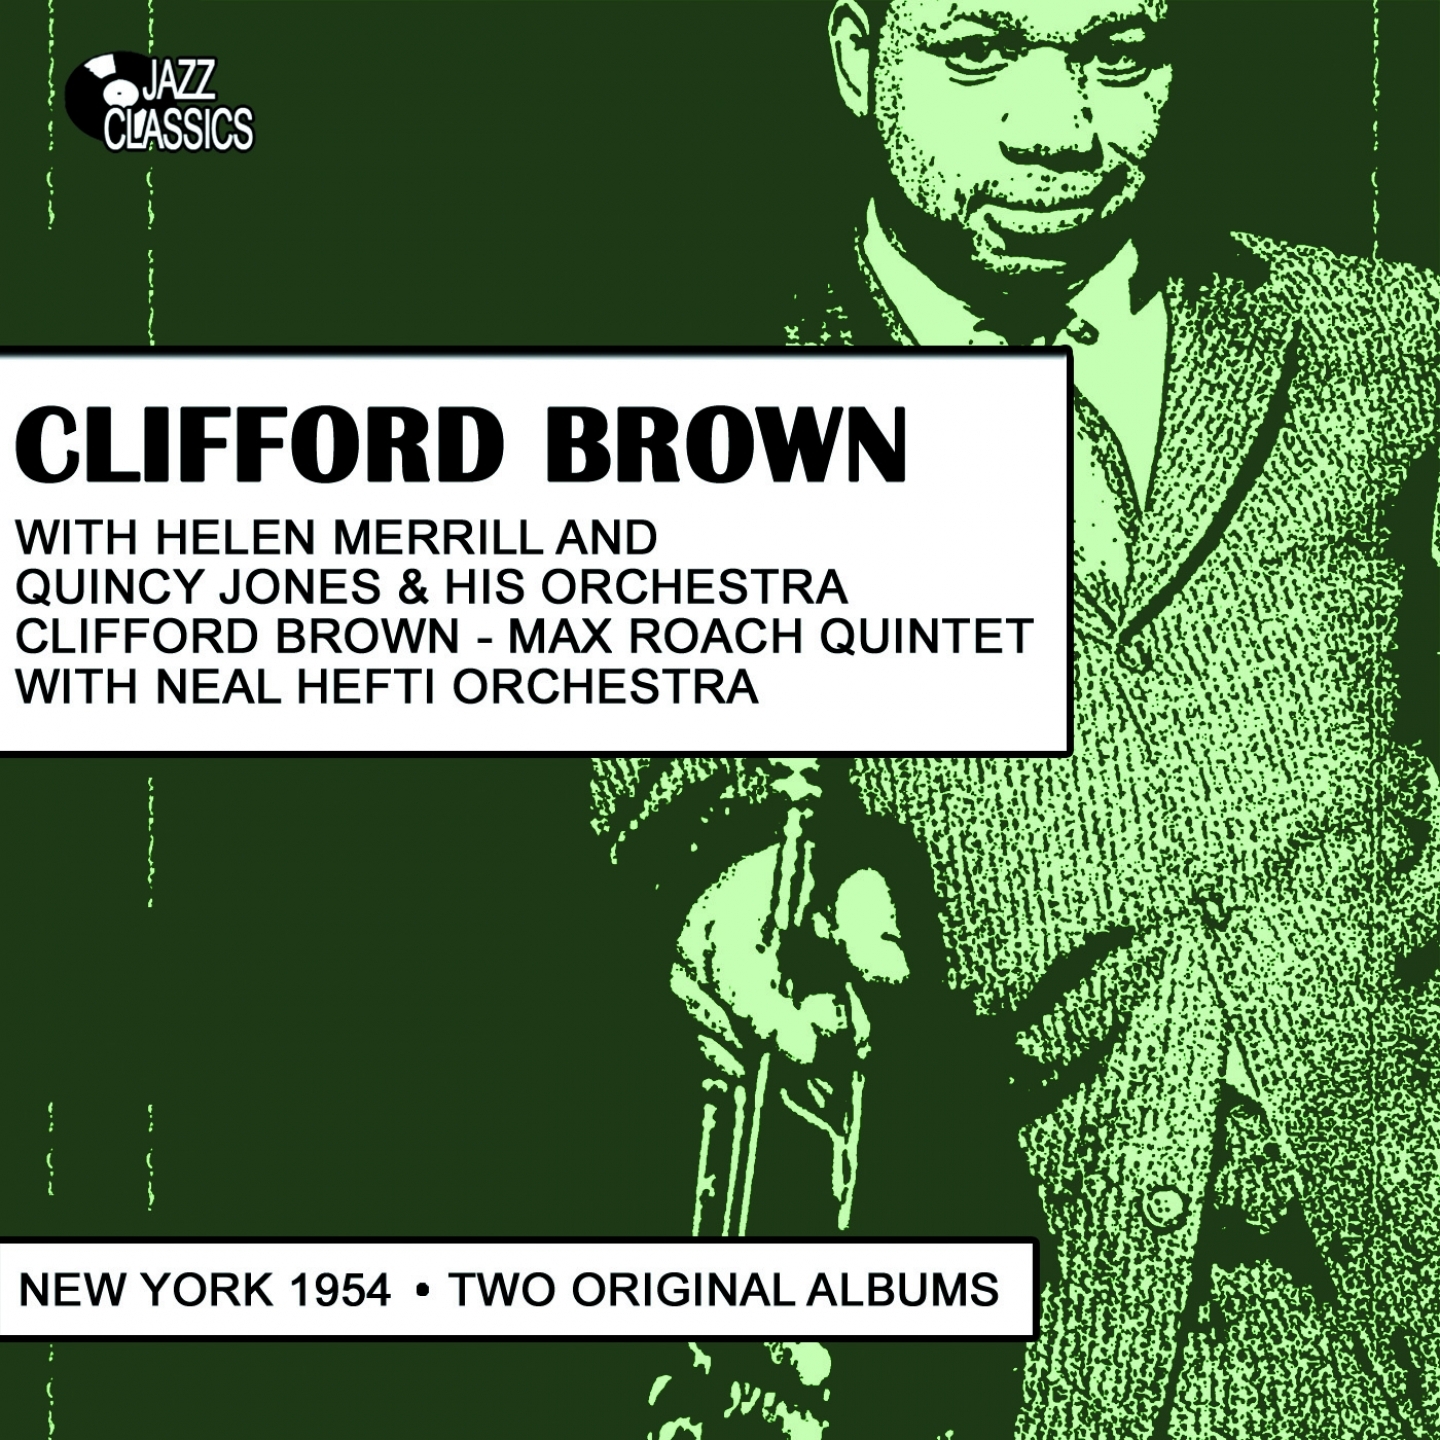 Clifford Brown With Helen Merrill, Quincy Jones, Max Roach Quintet With Neal Hefti Orchestra